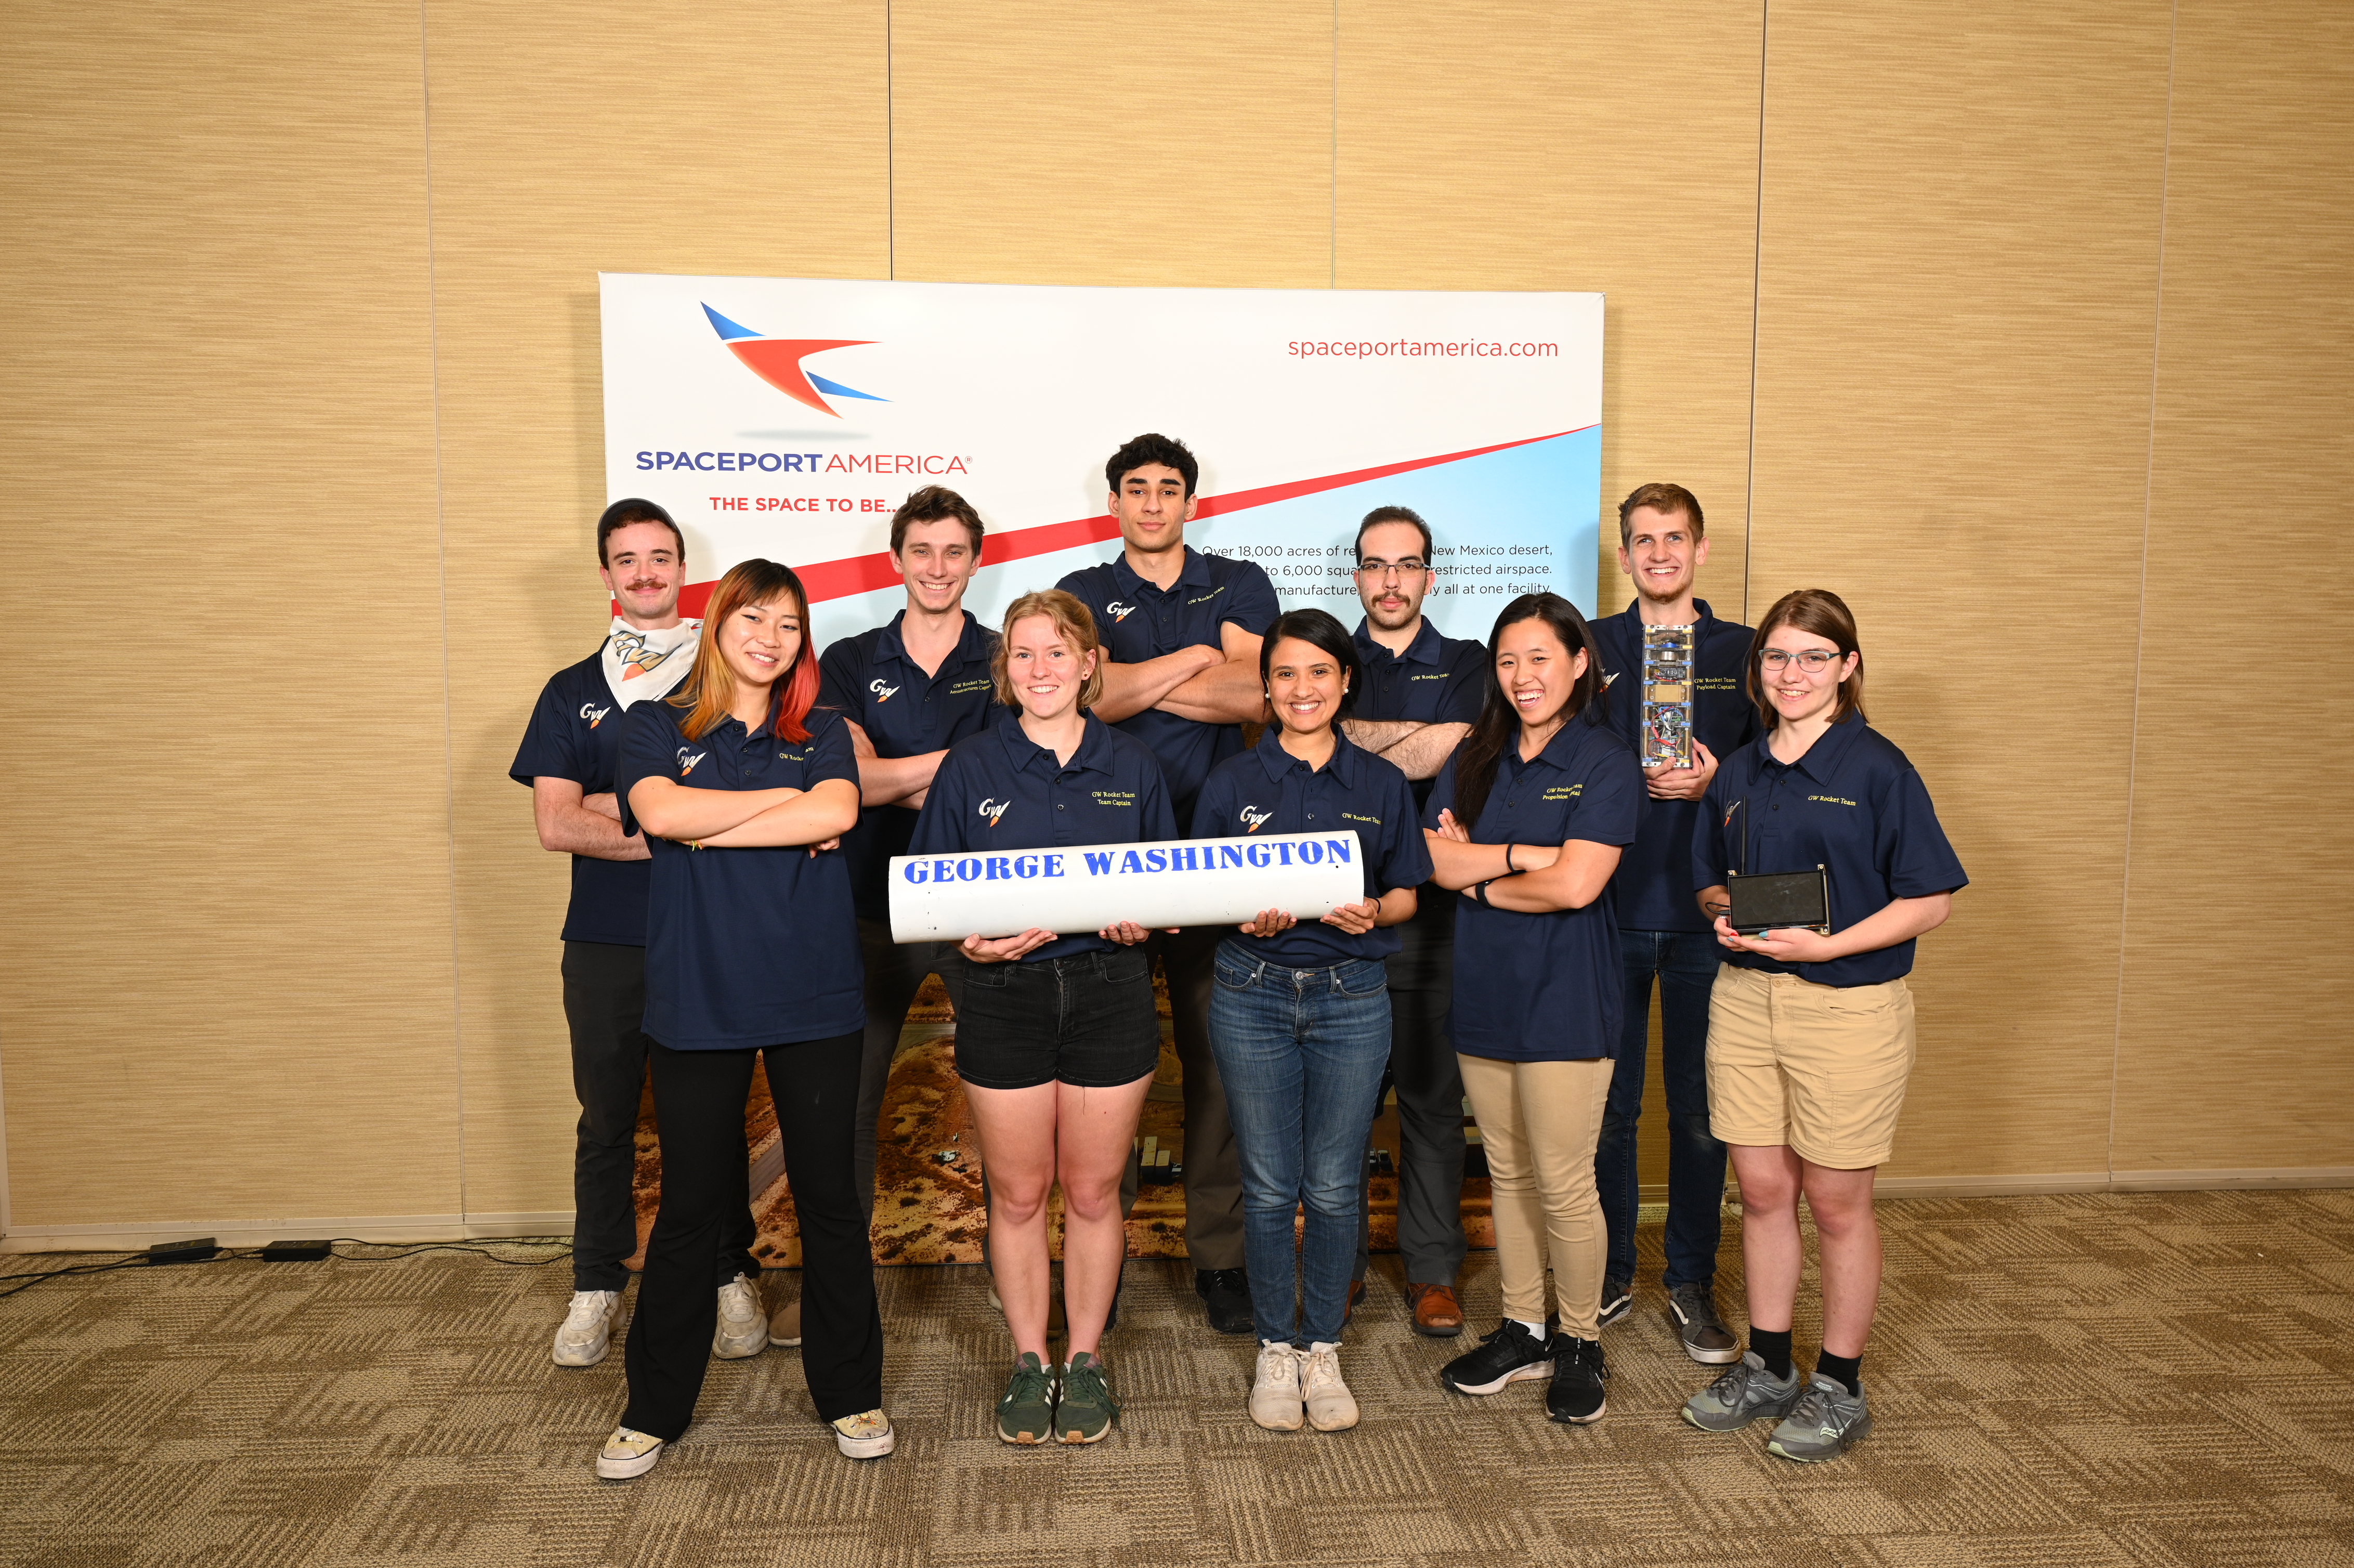 The 2023 GW Rocket Team smiling in front of a Spaceport America banner